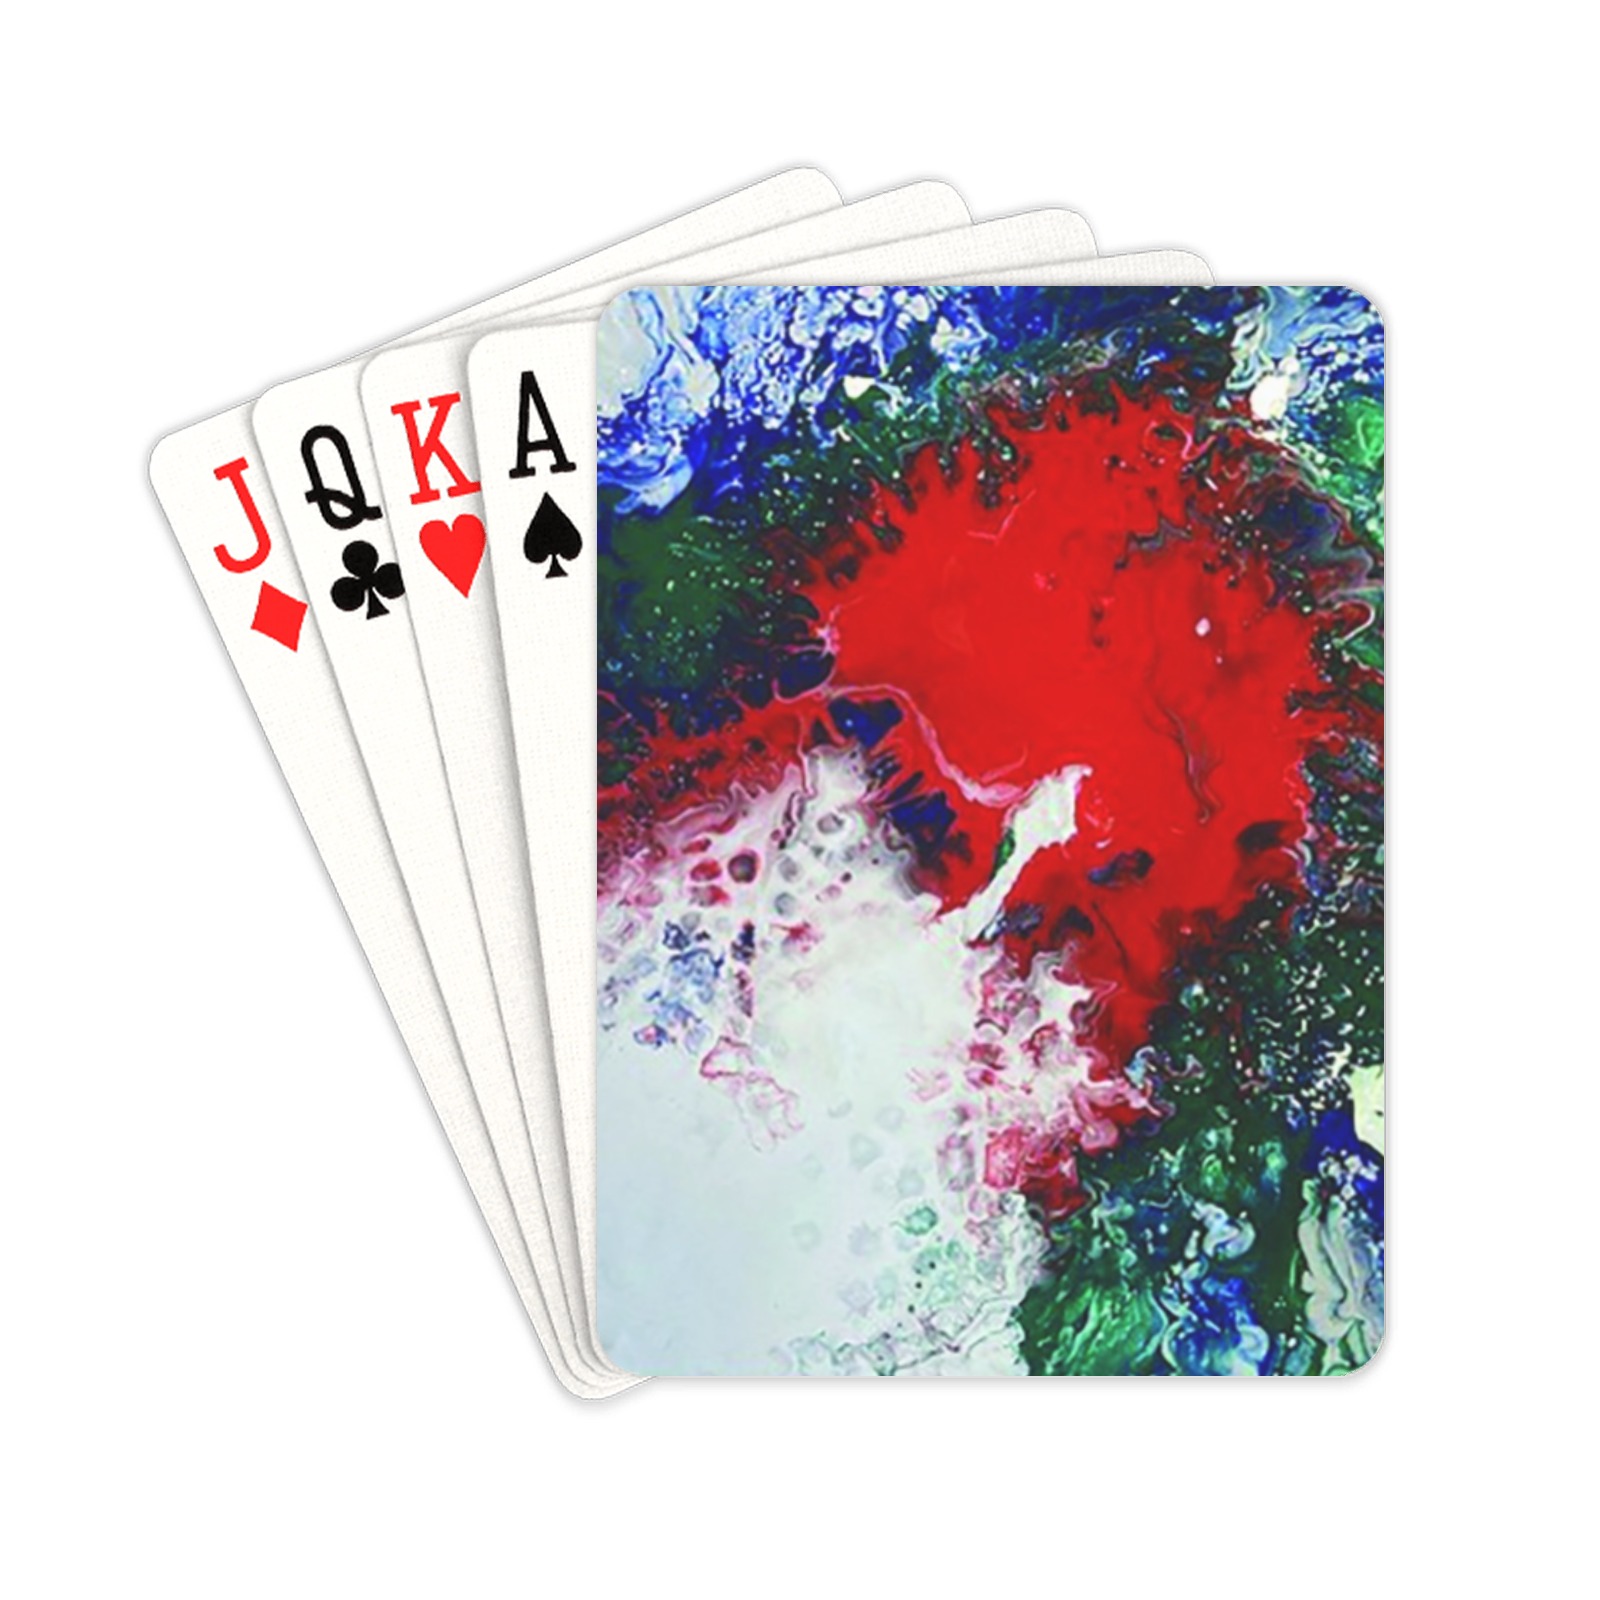 Eruption of Tranquility Playing Cards 2.5"x3.5"